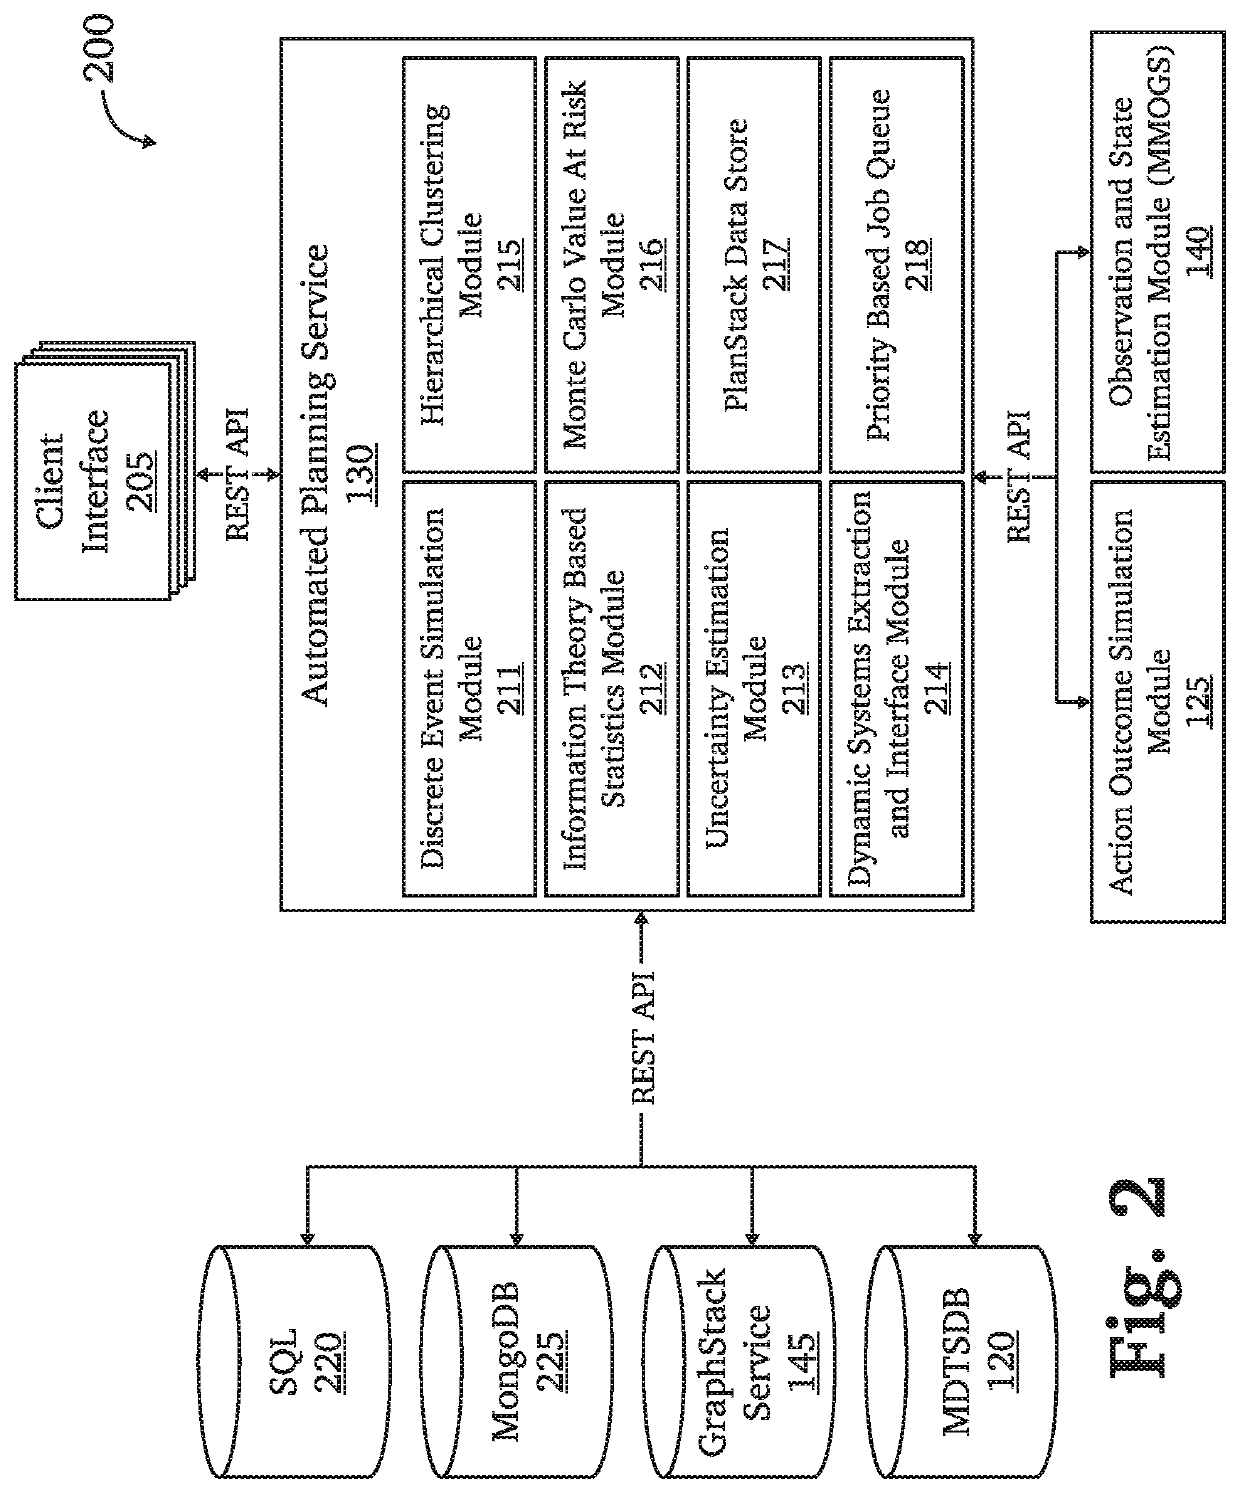 System and method for data extraction, processing, and management across multiple communication platforms